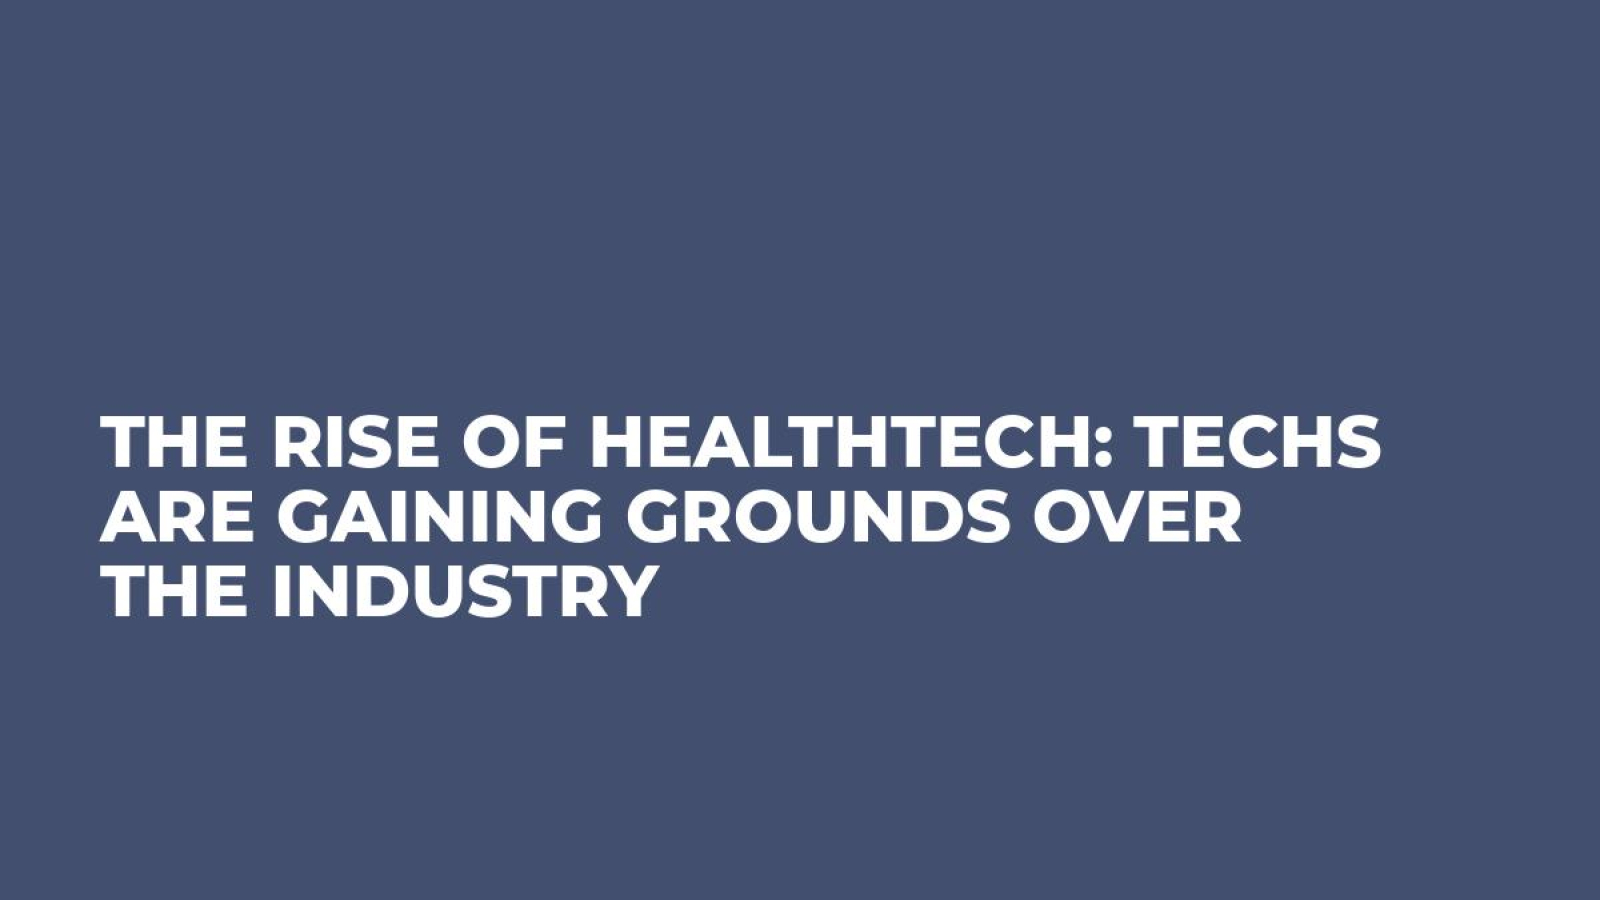 The rise of healthtech: techs are gaining grounds over the industry